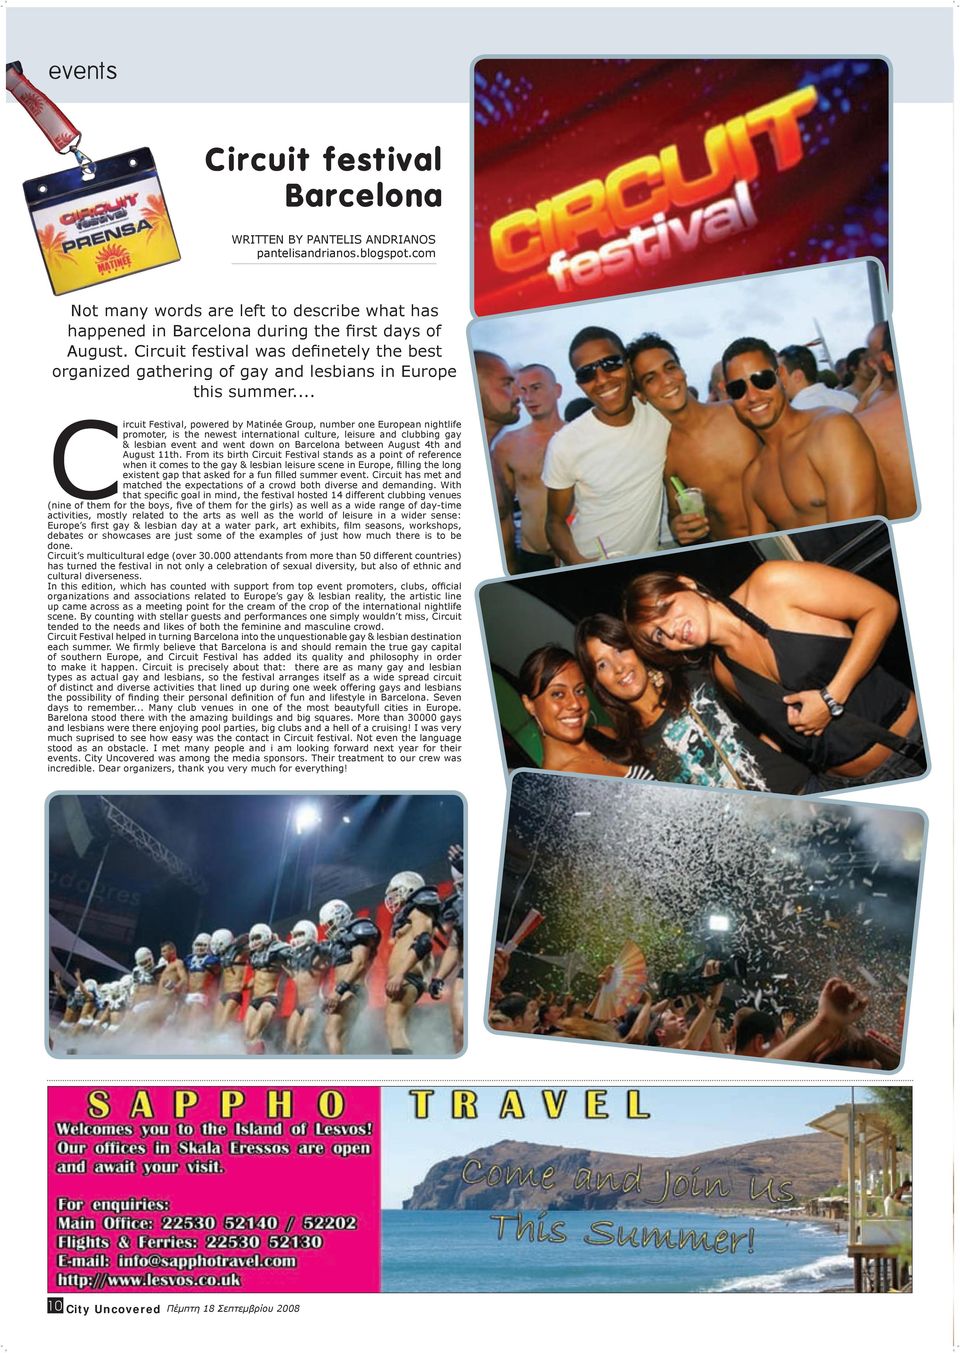 .. Circuit Festival, powered by Matinée Group, number one European nightlife promoter, is the newest international culture, leisure and clubbing gay & lesbian event and went down on Barcelona between